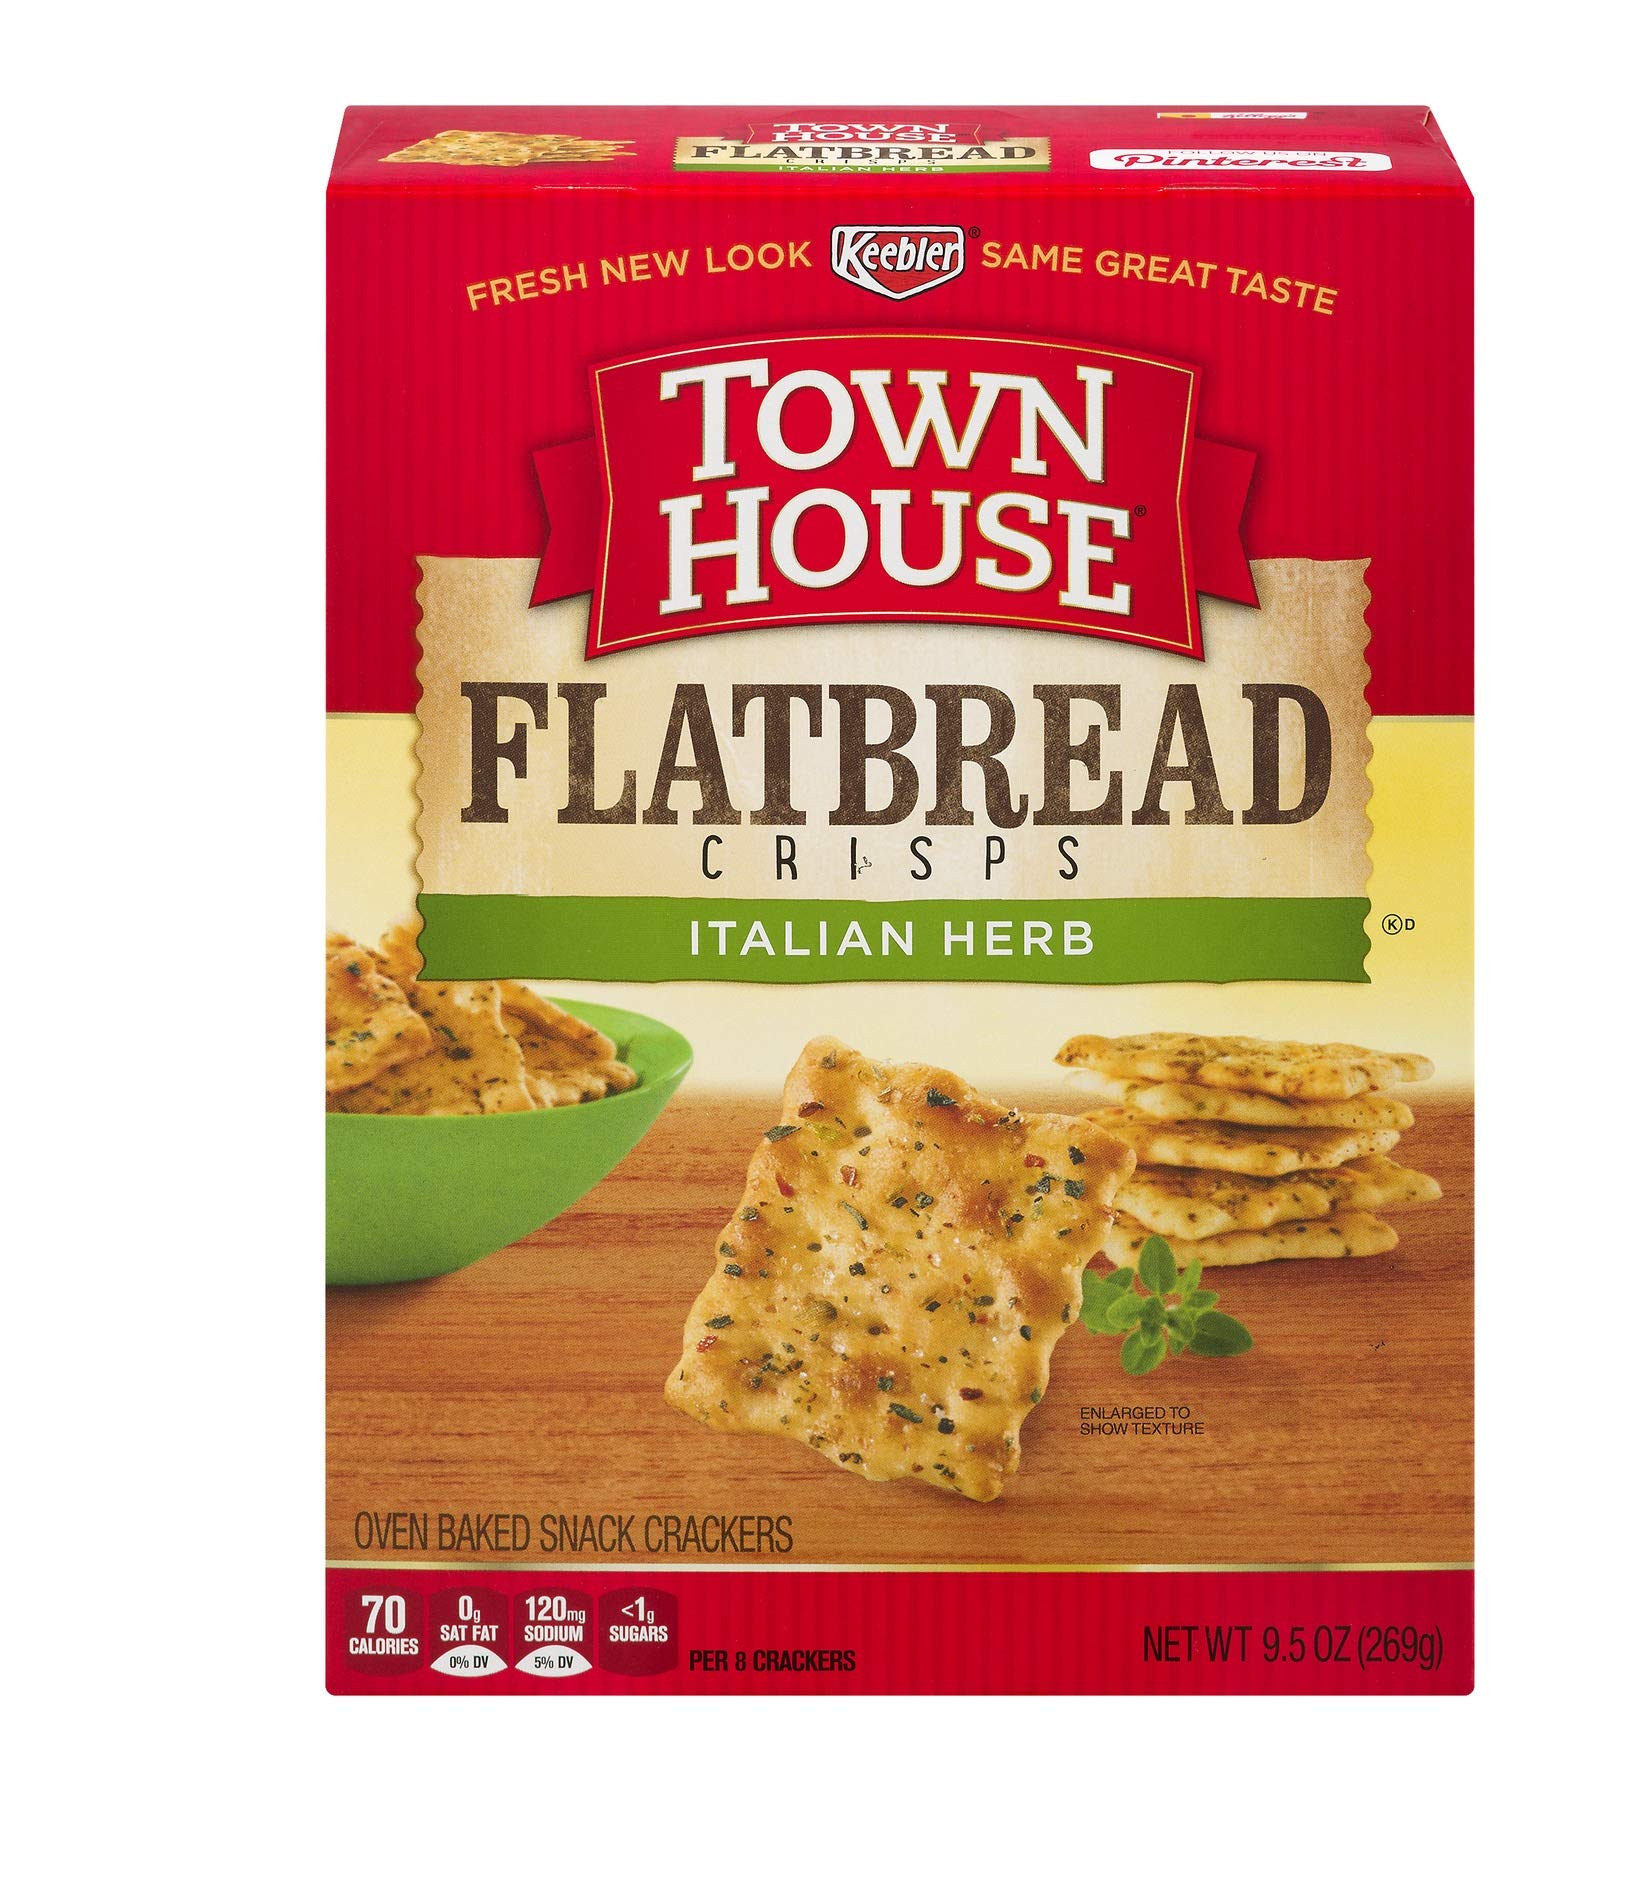 Keebler, Town House, Flatbread Crisps, Italian Herb Crackers, 9.5Oz Box (Pack Of 6) - image 1 of 1